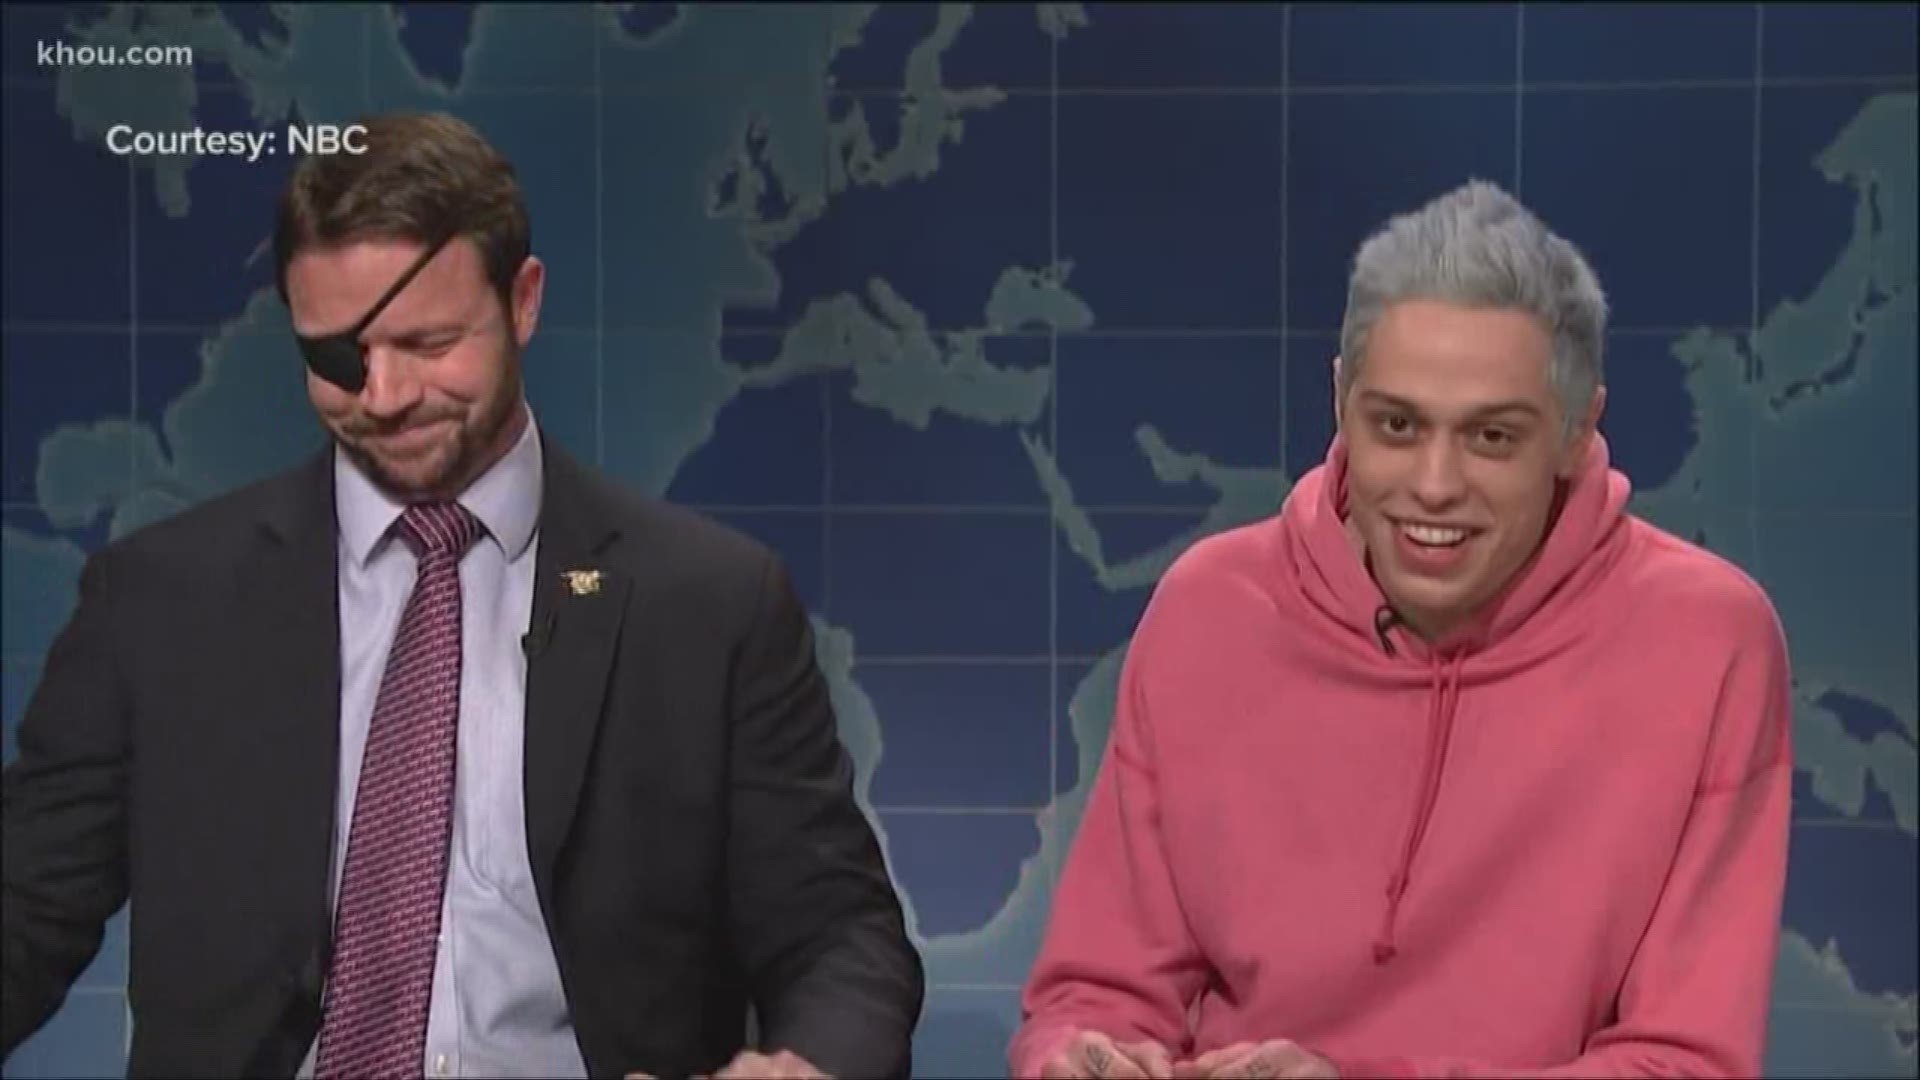 Congressman-elect Dan Crenshaw made a surprise appearance on Saturday Night Live, making peace with the comedian who mocked him last week. Congressman-elect Dan Crenshaw made a surprise appearance on Saturday Night Live, making peace with the comedian who